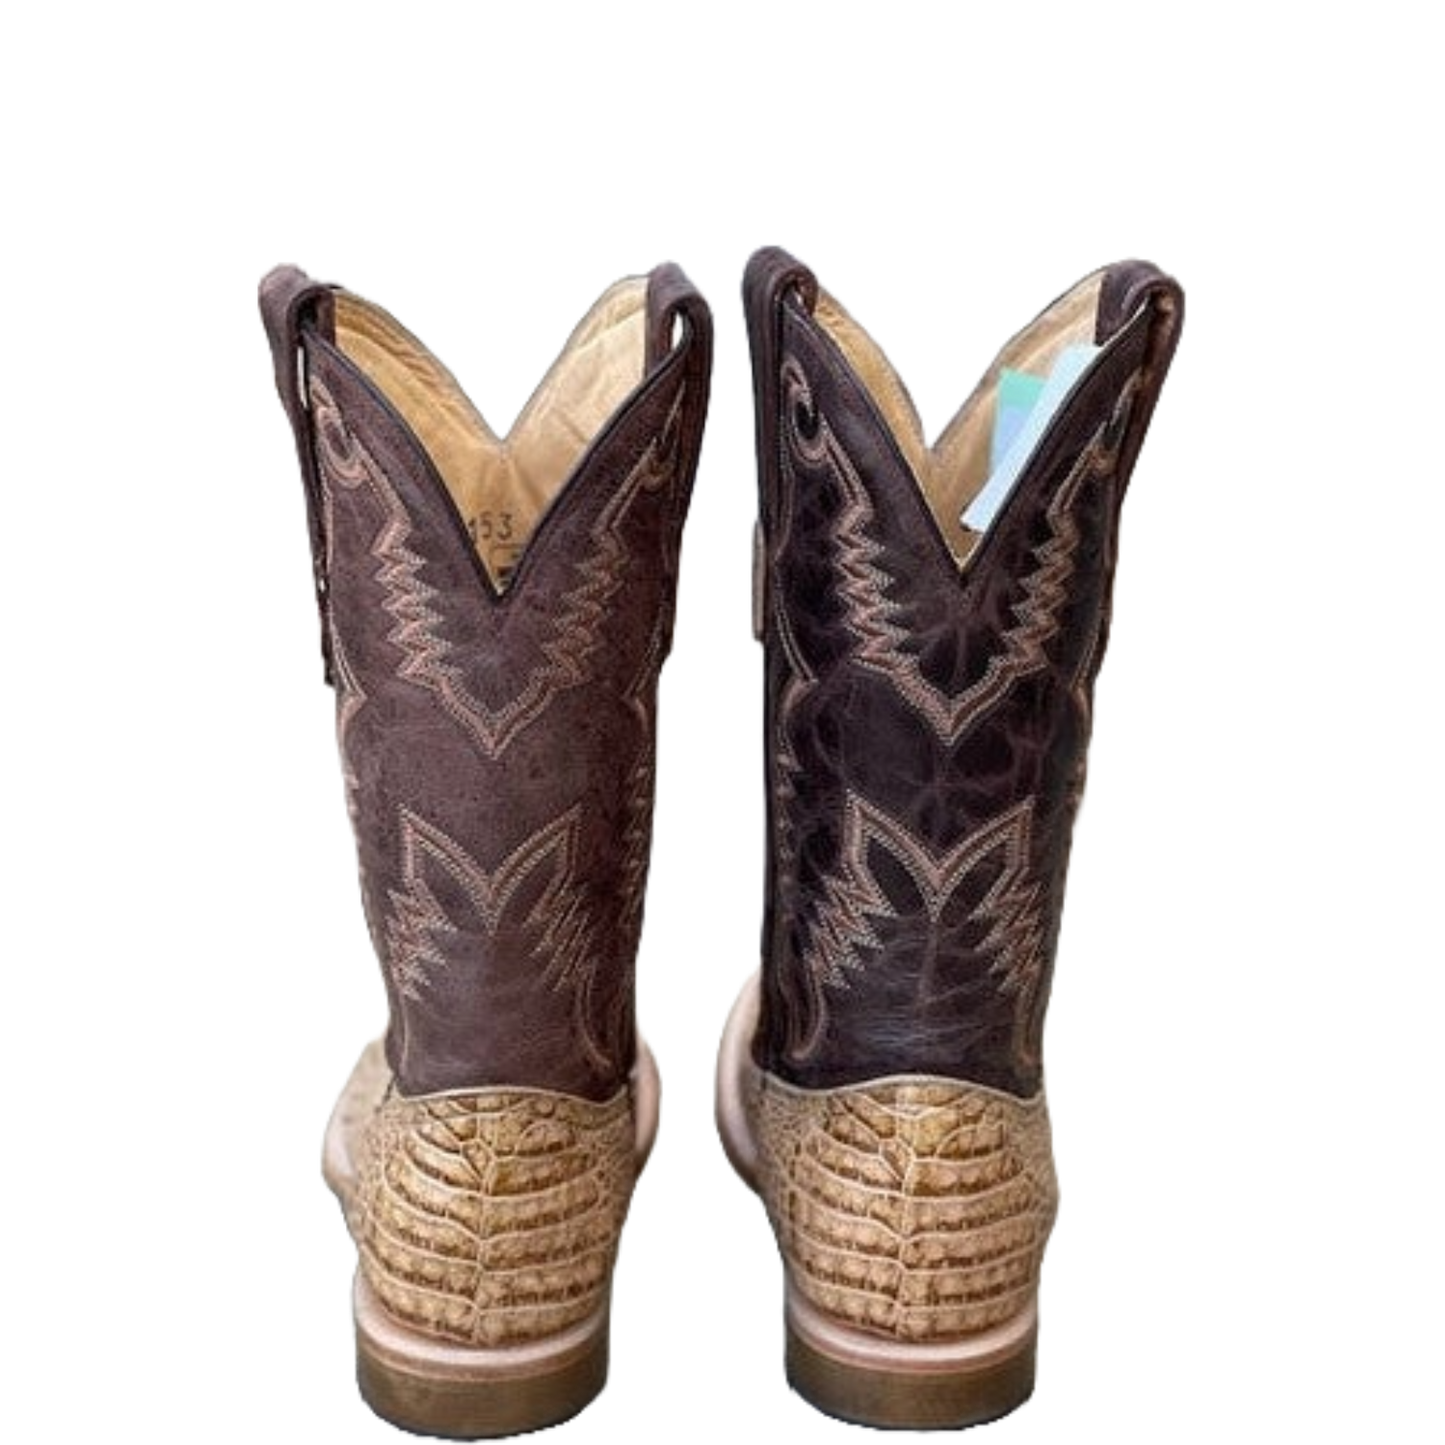 Cowtown Men's Orxy Caiman Belly Print Square Toe Western Boots Q6153